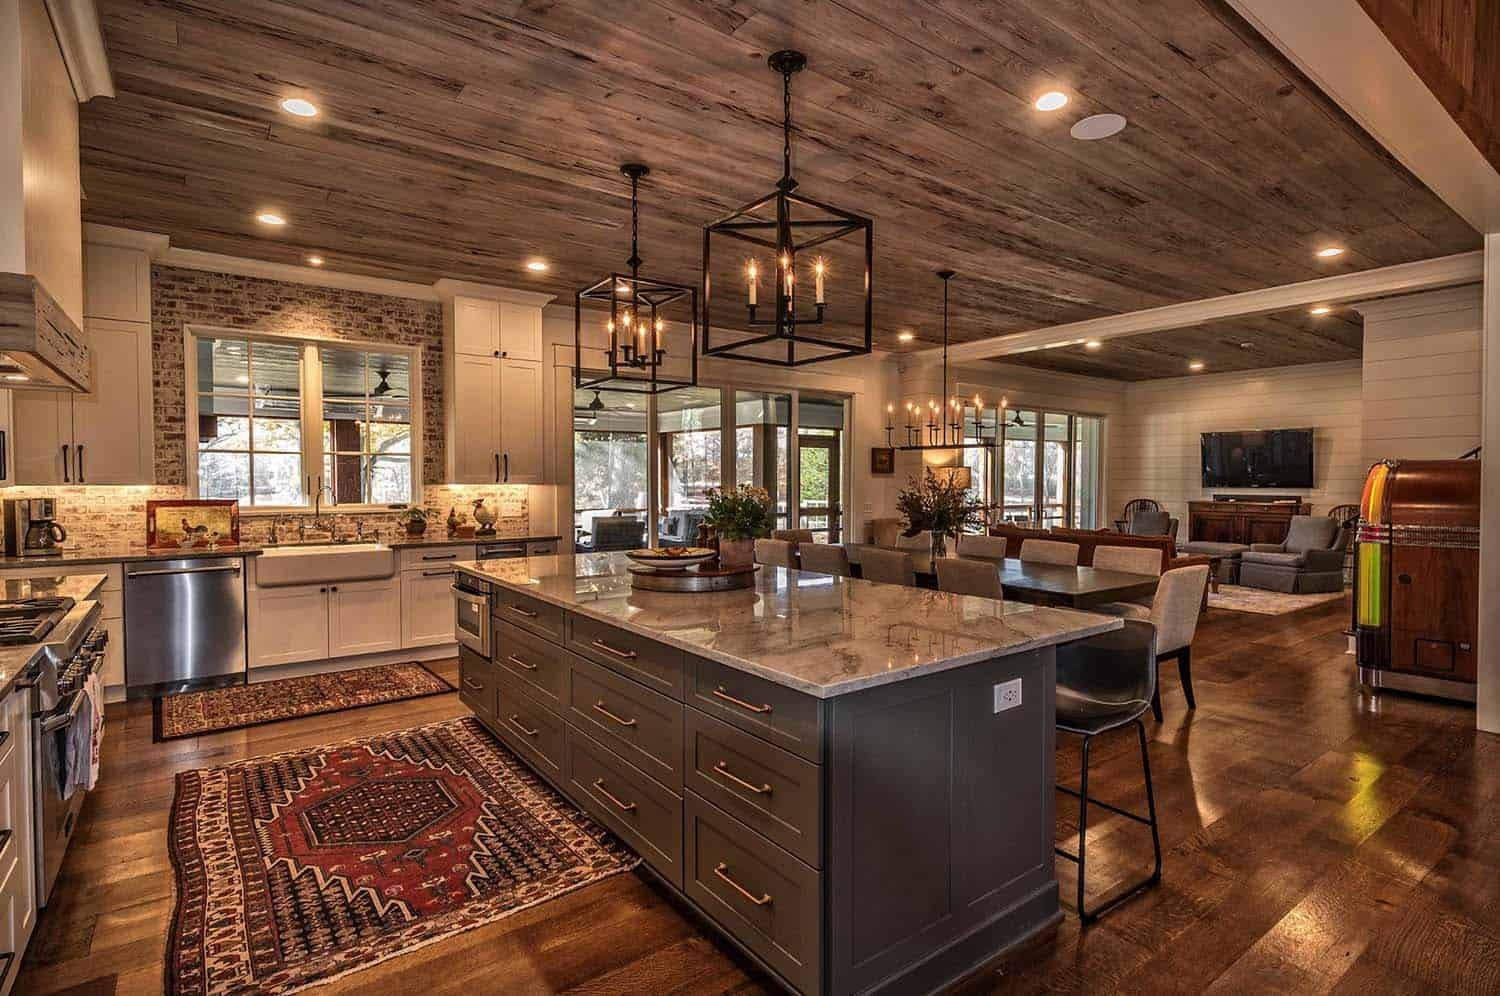 The Rustic Kitchen
 40 Unbelievable Rustic Kitchen Design Ideas To Steal